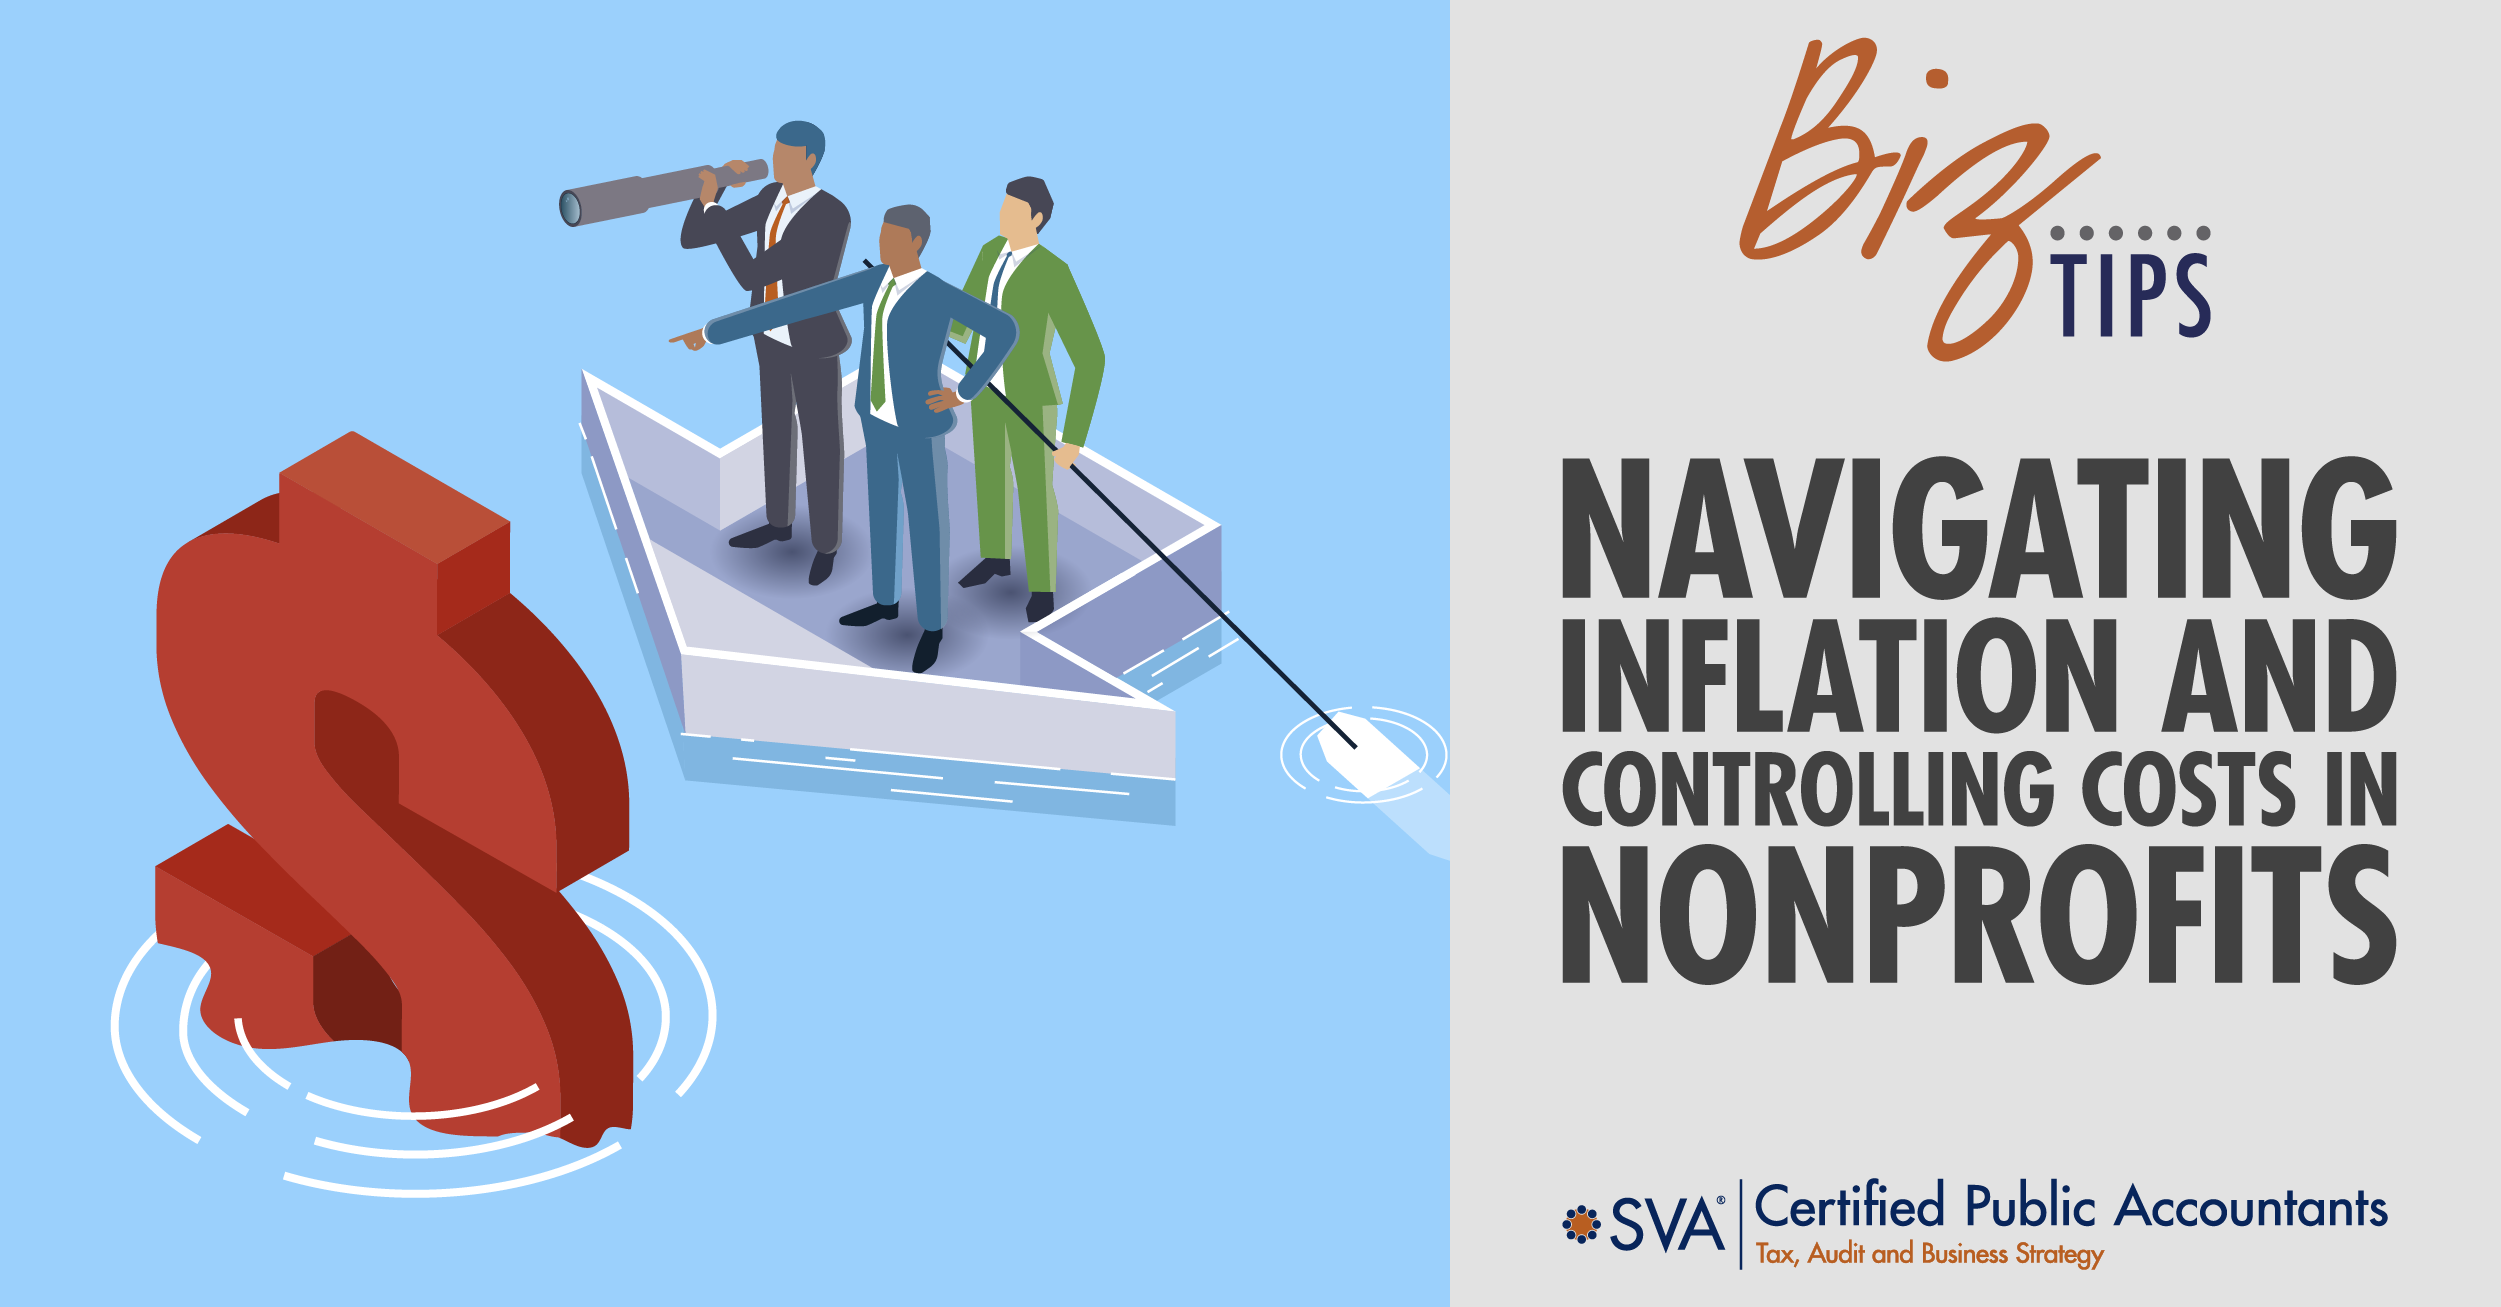 Navigating Inflation and Controlling Costs in Nonprofits